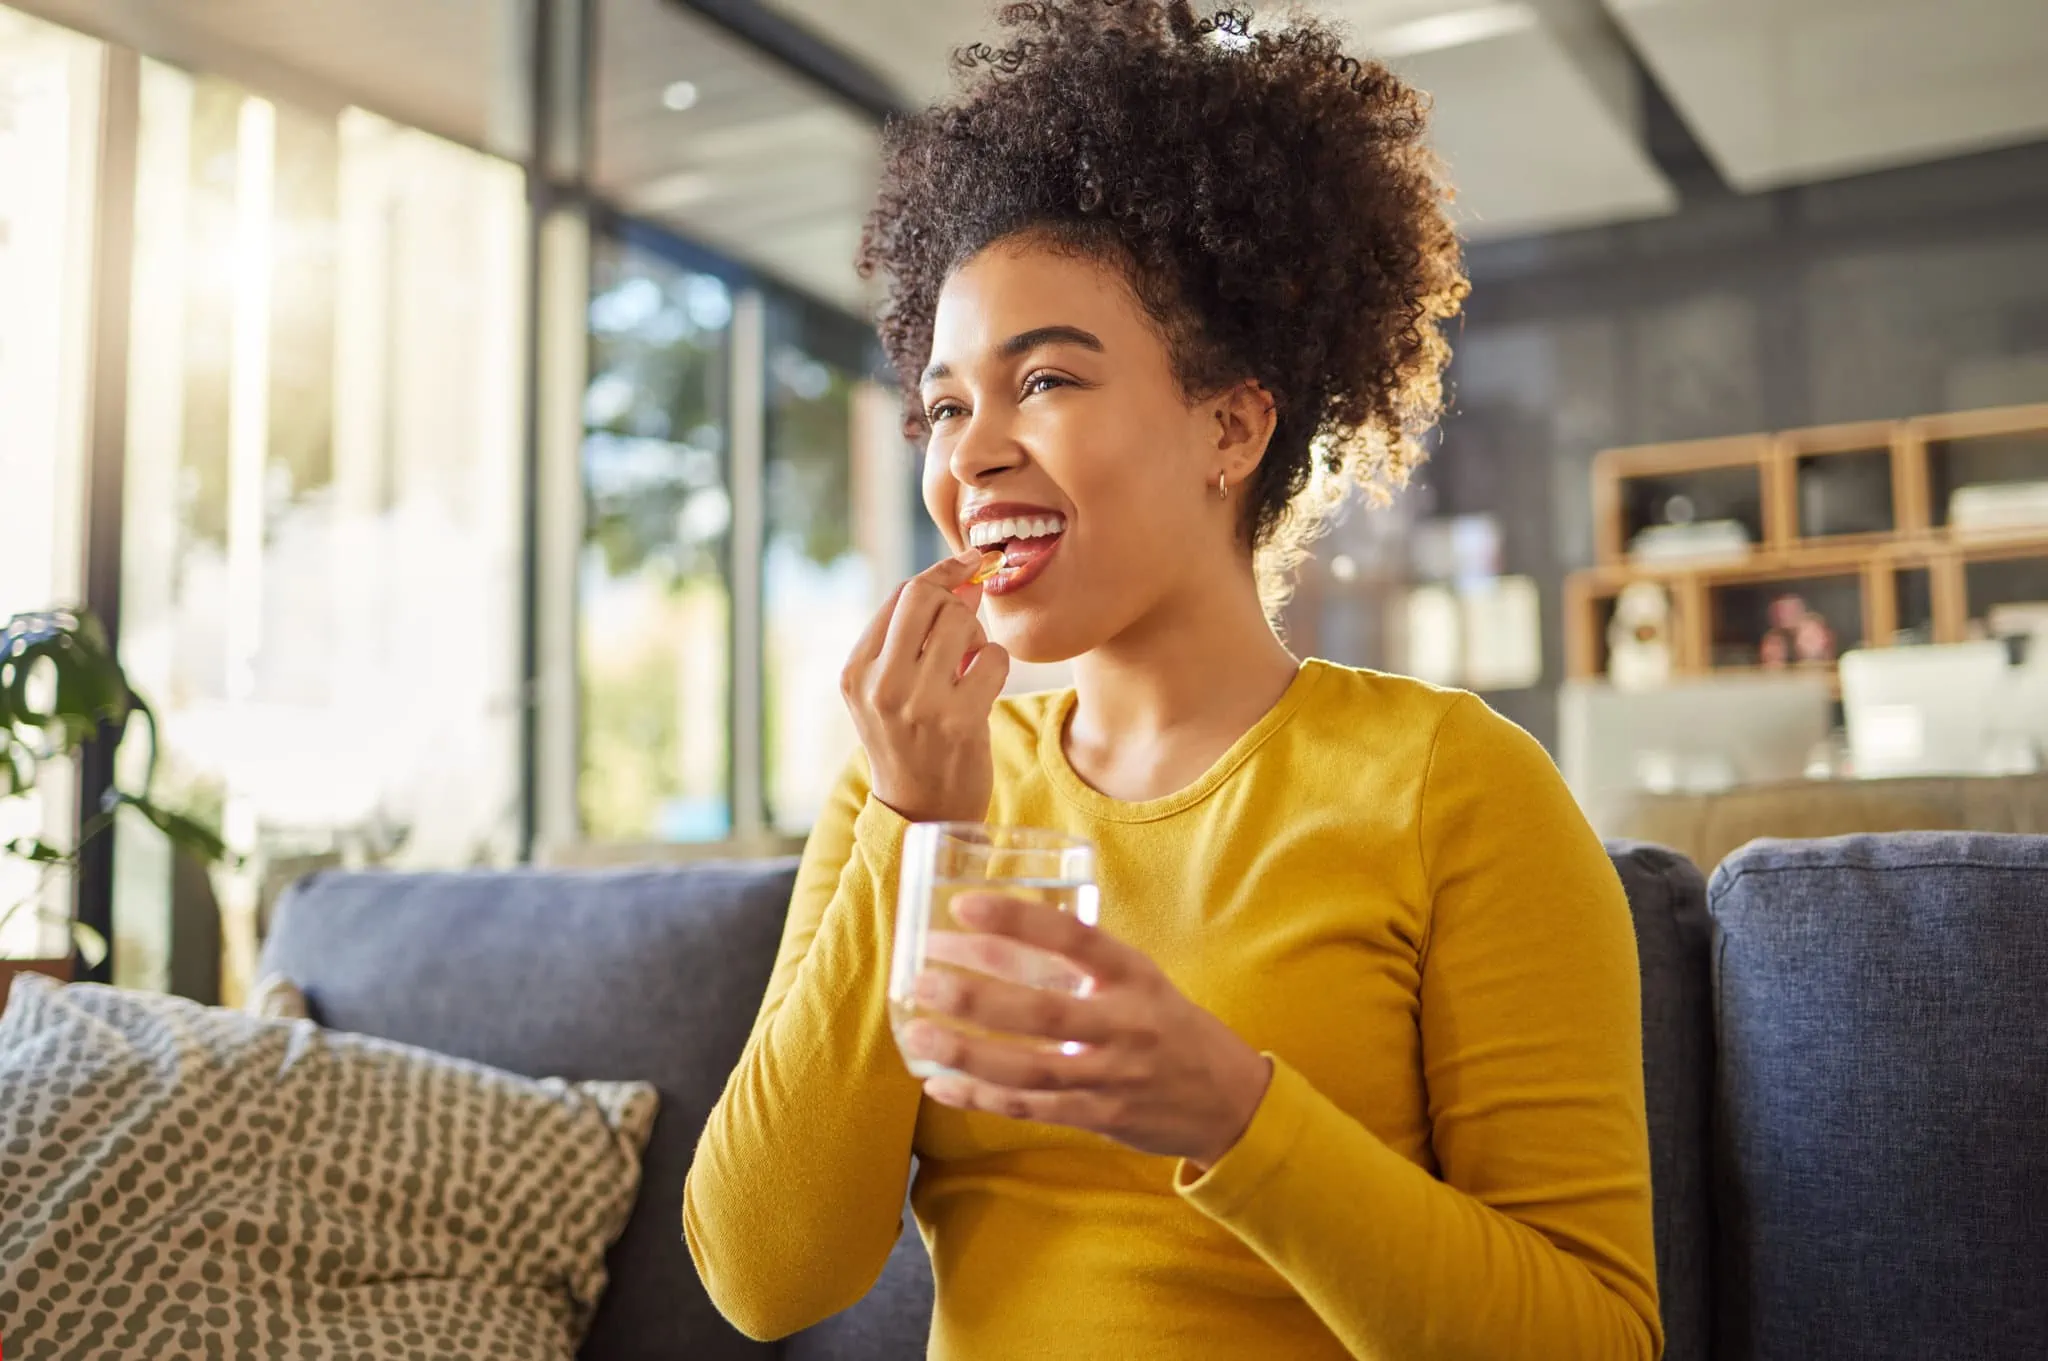 Young happy healthy woman taking an herbal supplement with a glass of water